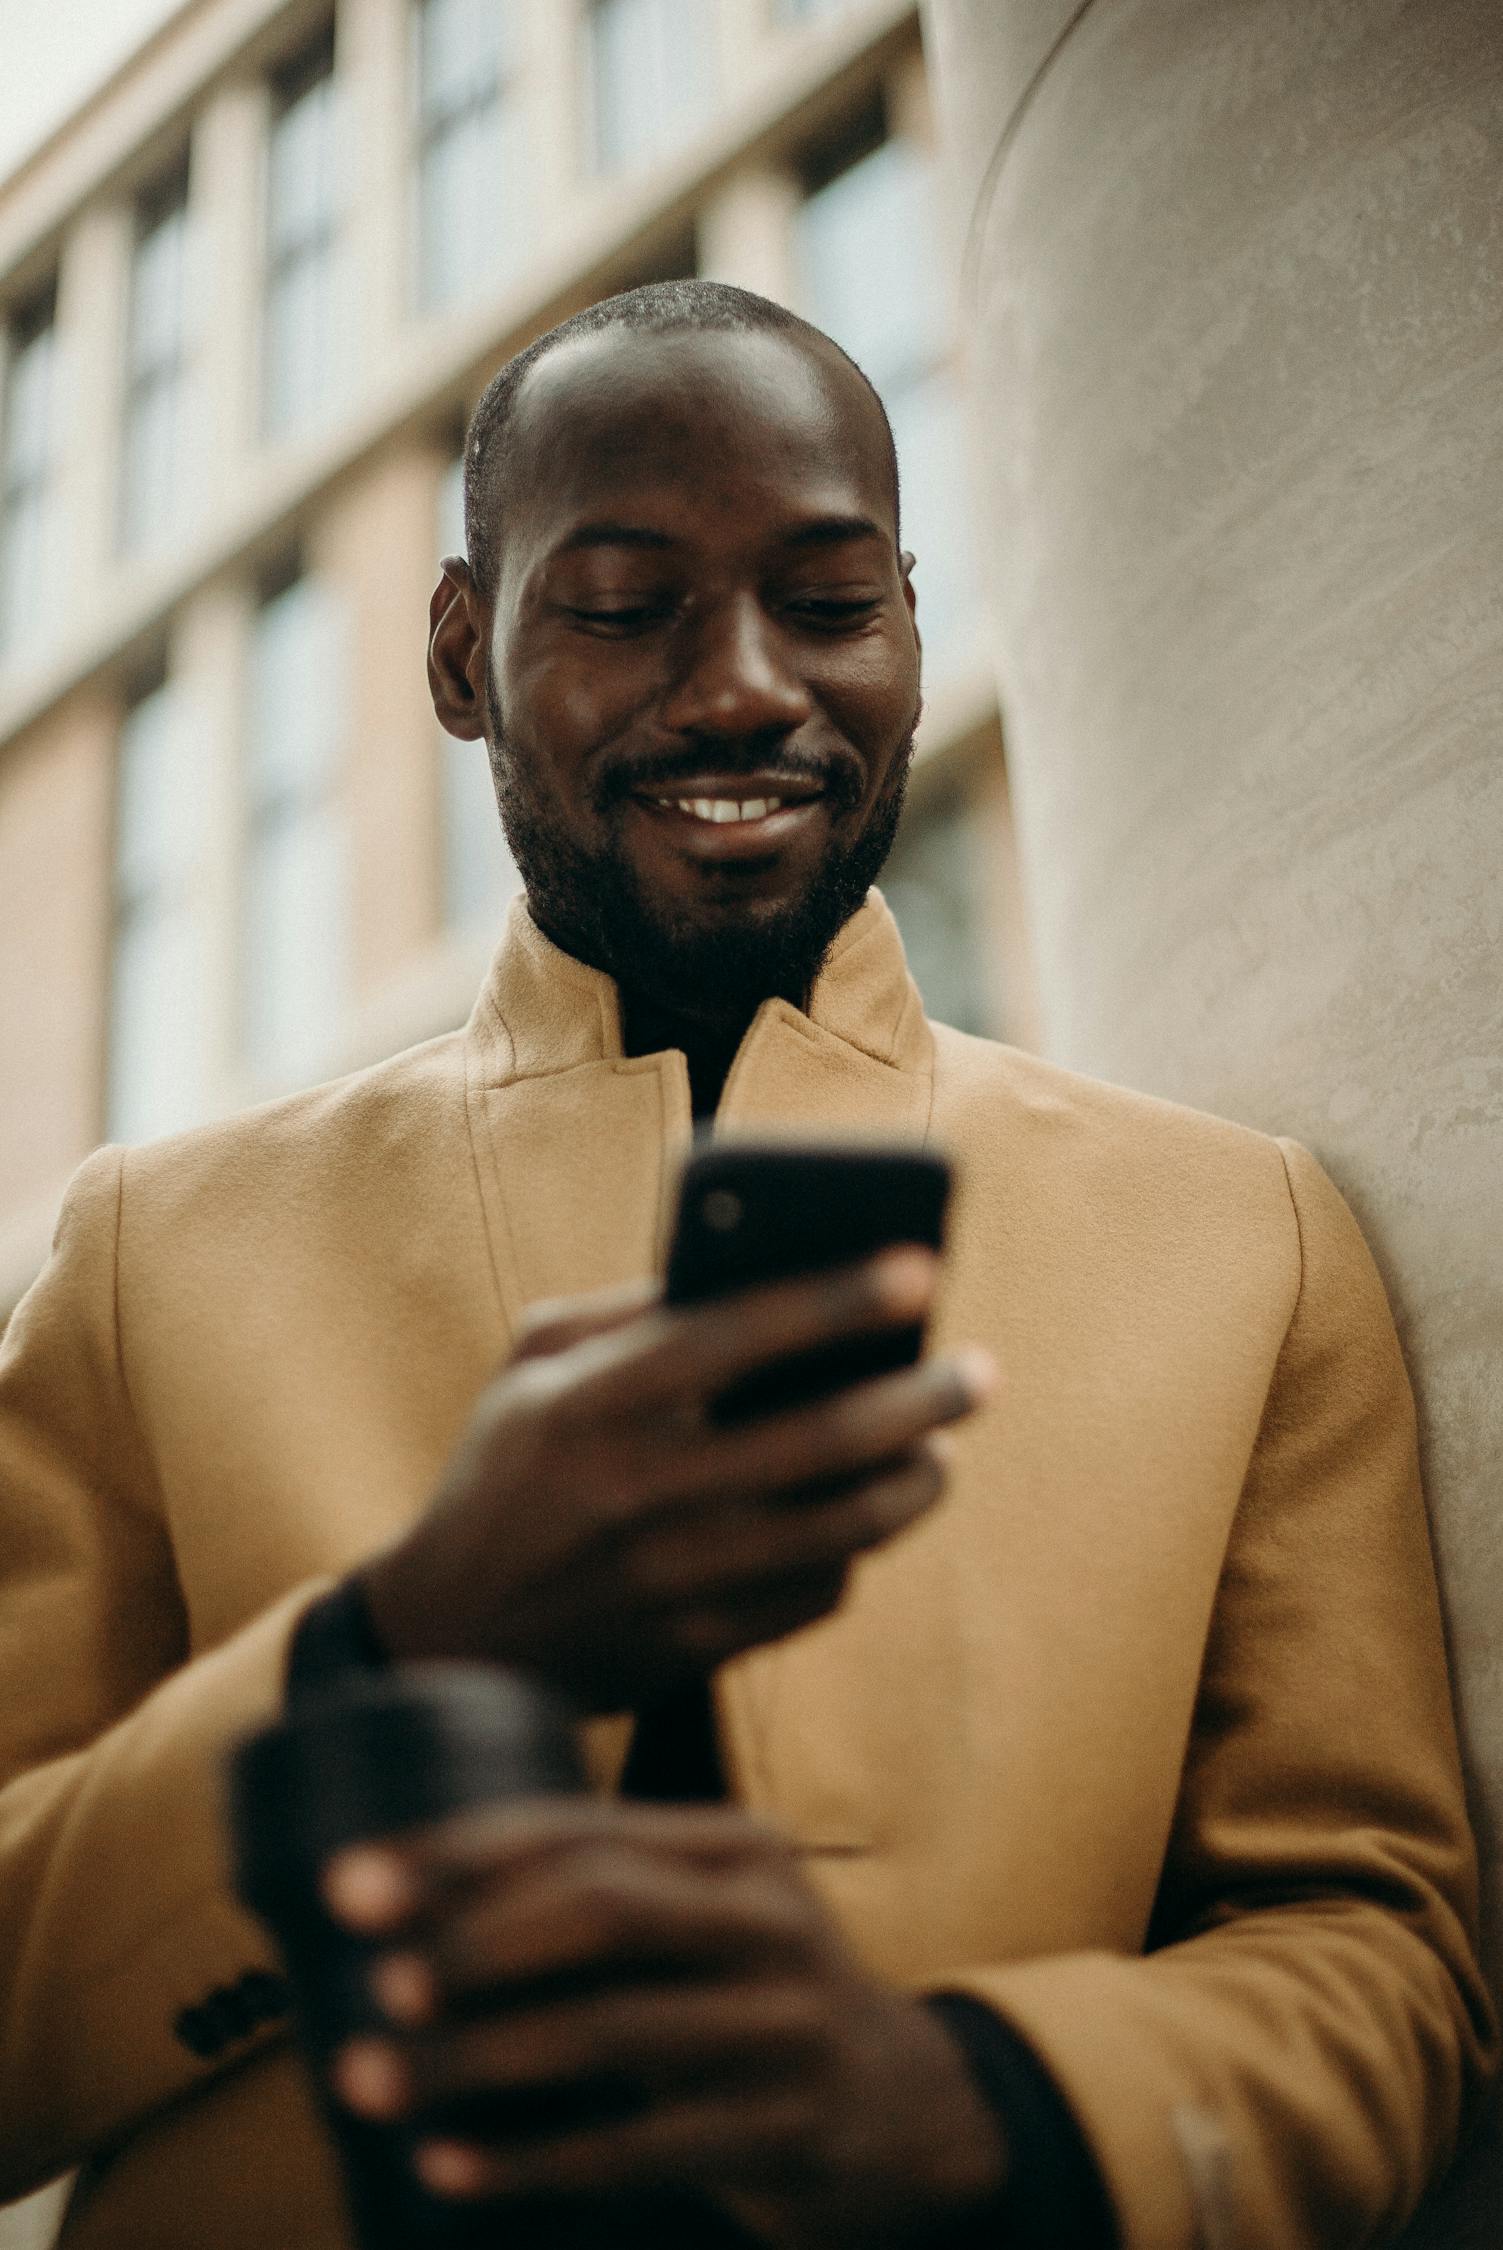 Smiling Man Looking at His Phone Leaning on Concrete Pillar